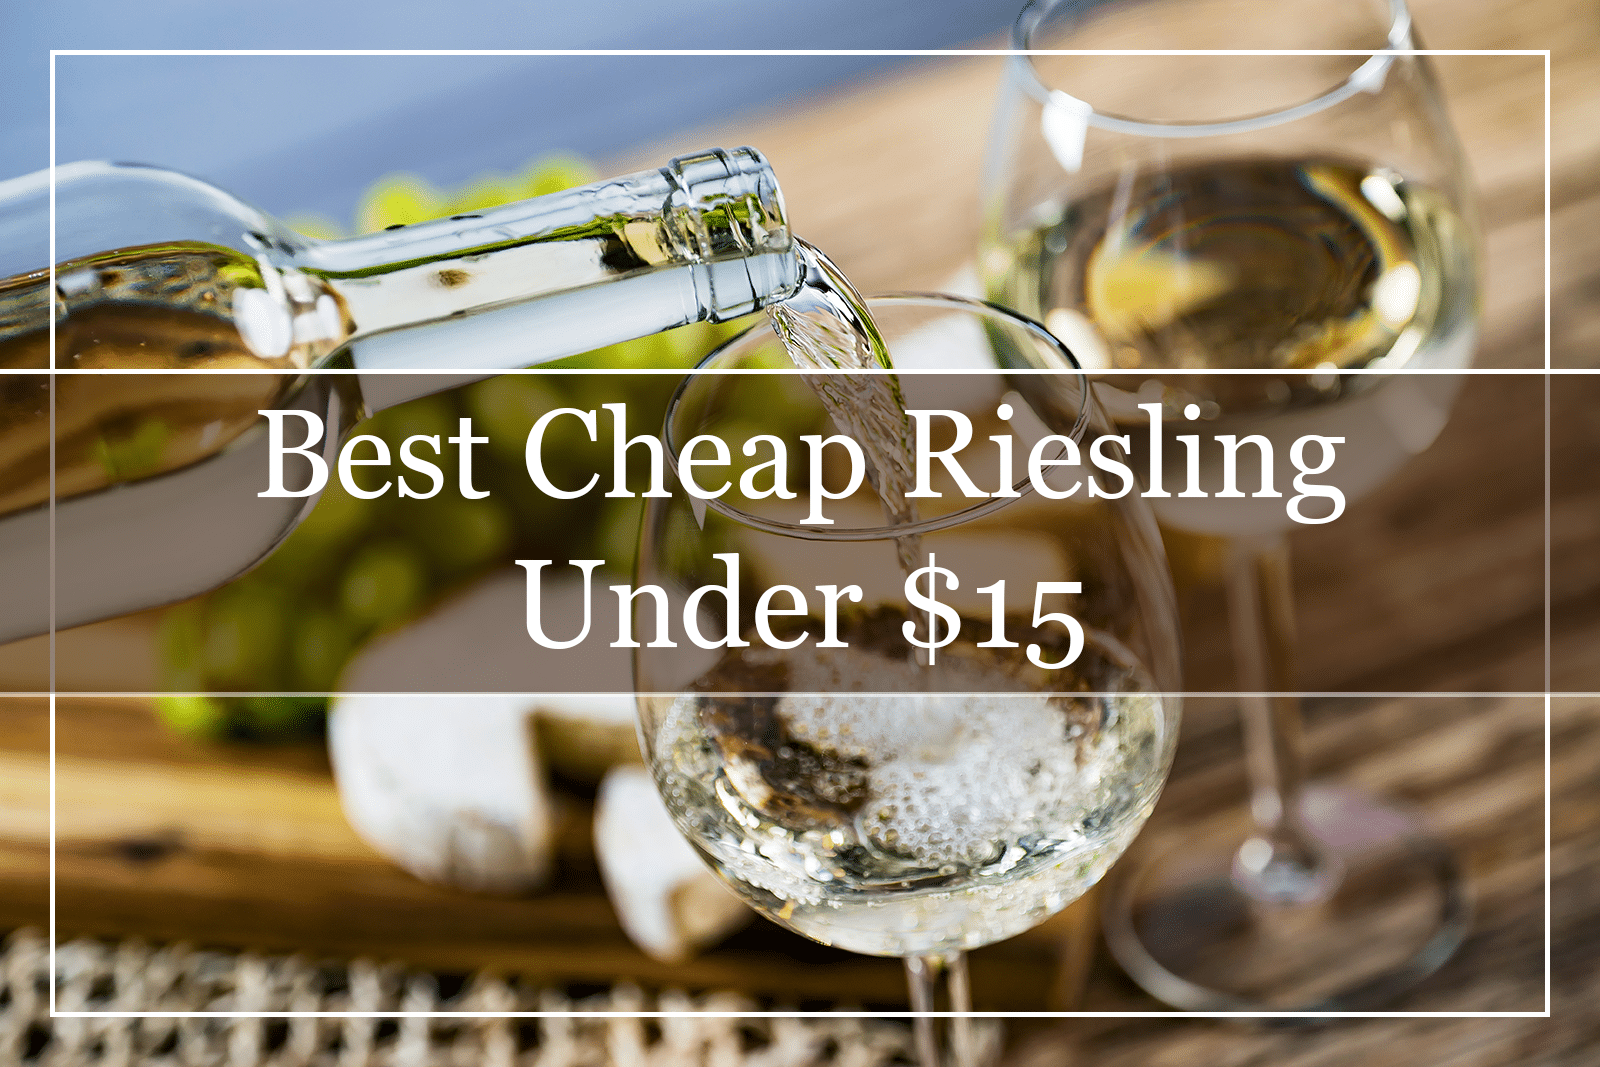 10 Best Cheap Riesling Wines Under $15 (2021)